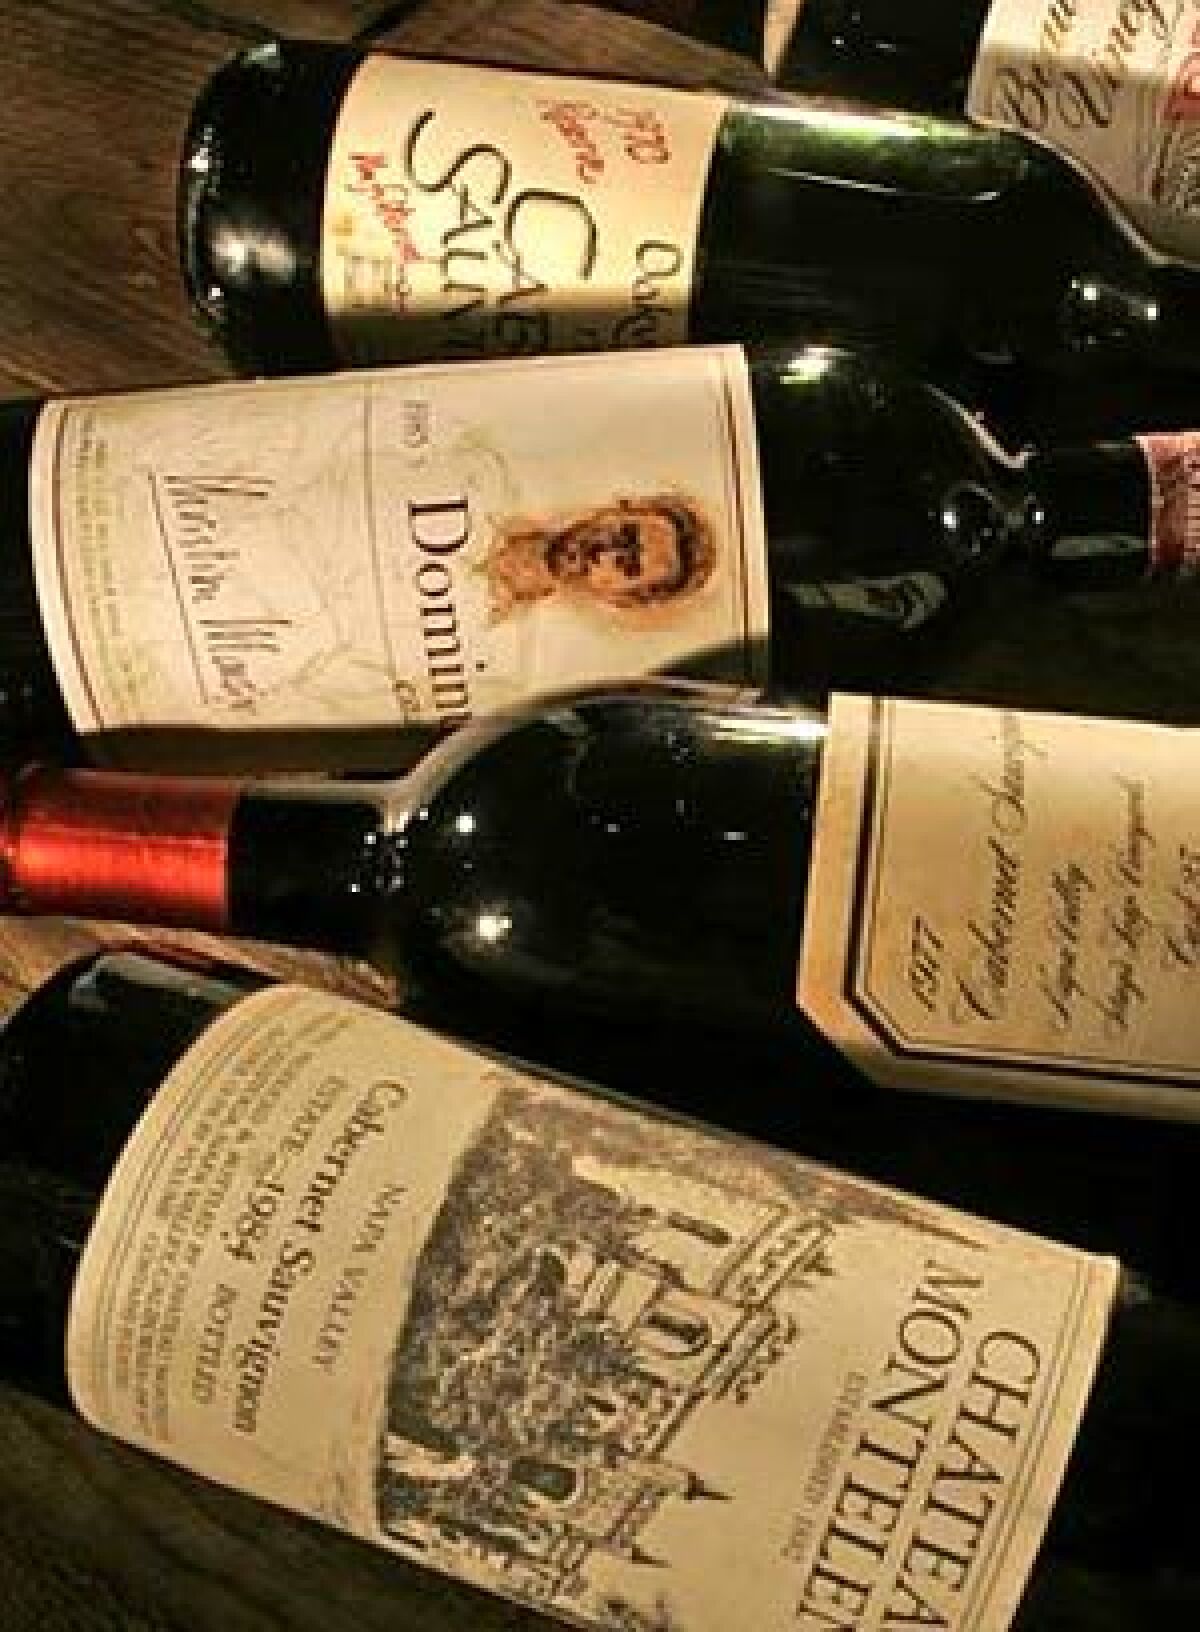 LEGENDS: In a wine auction world gone wild, bidding for pre-1986 California wines is an accessible online adventure.